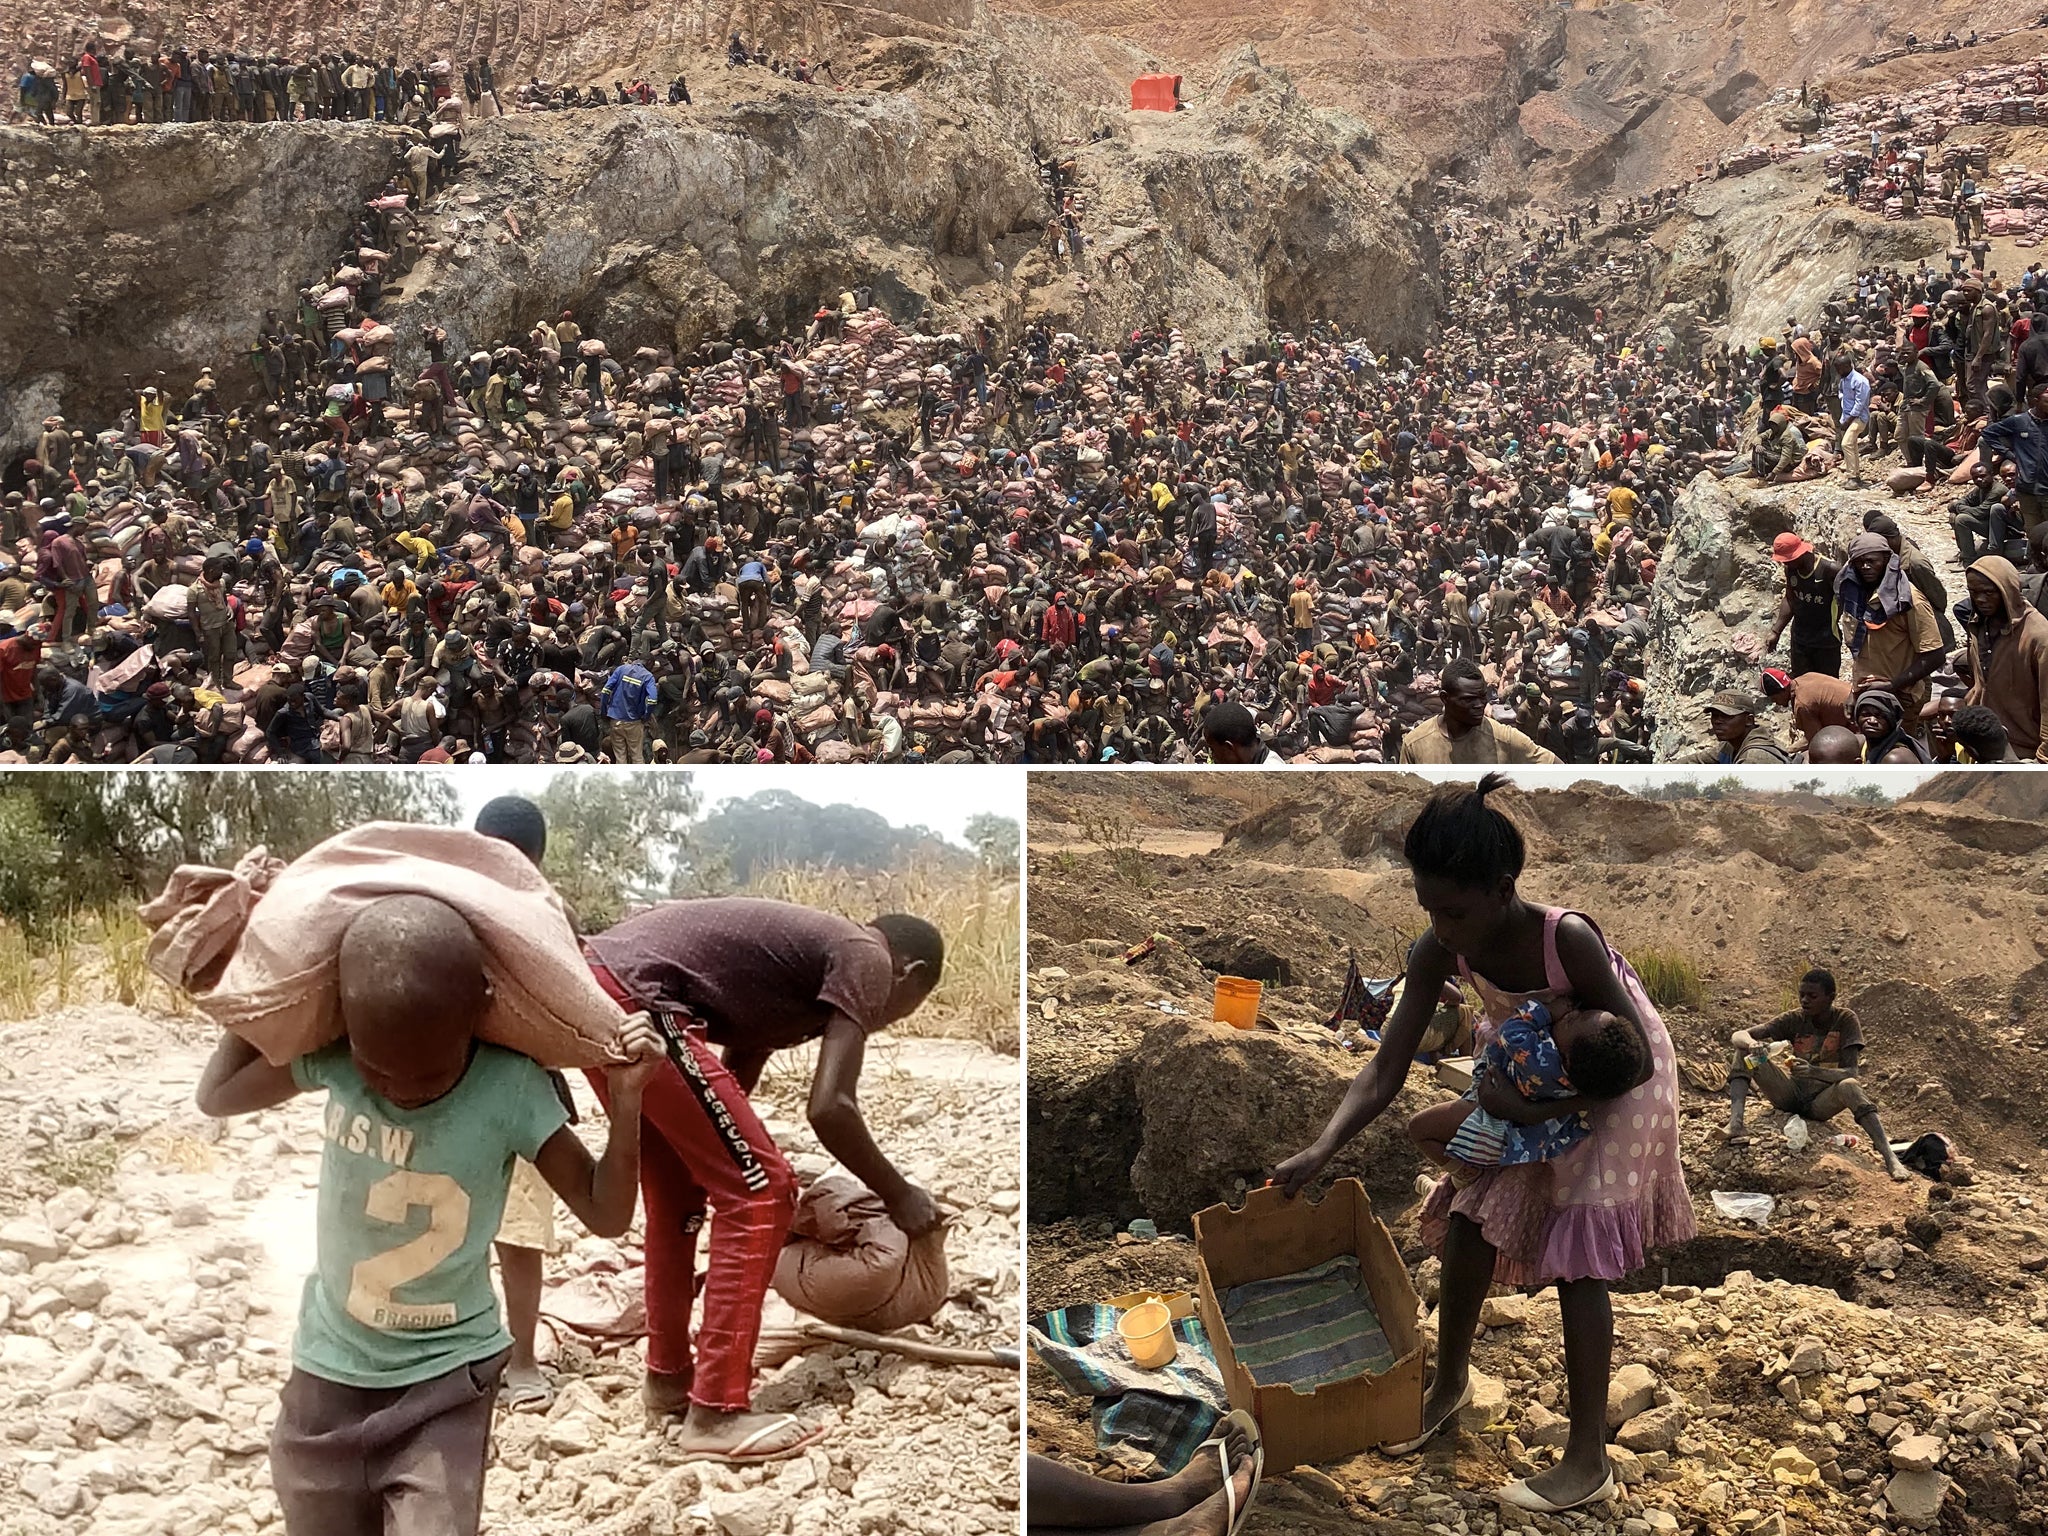 The artisanal mining industry in the Democratic Republic of the Congo is rife with forced and child labor, unreported deaths and human rights abuses, writes academic and modern slavery researcher Siddharth Kara in his new book Cobalt Red